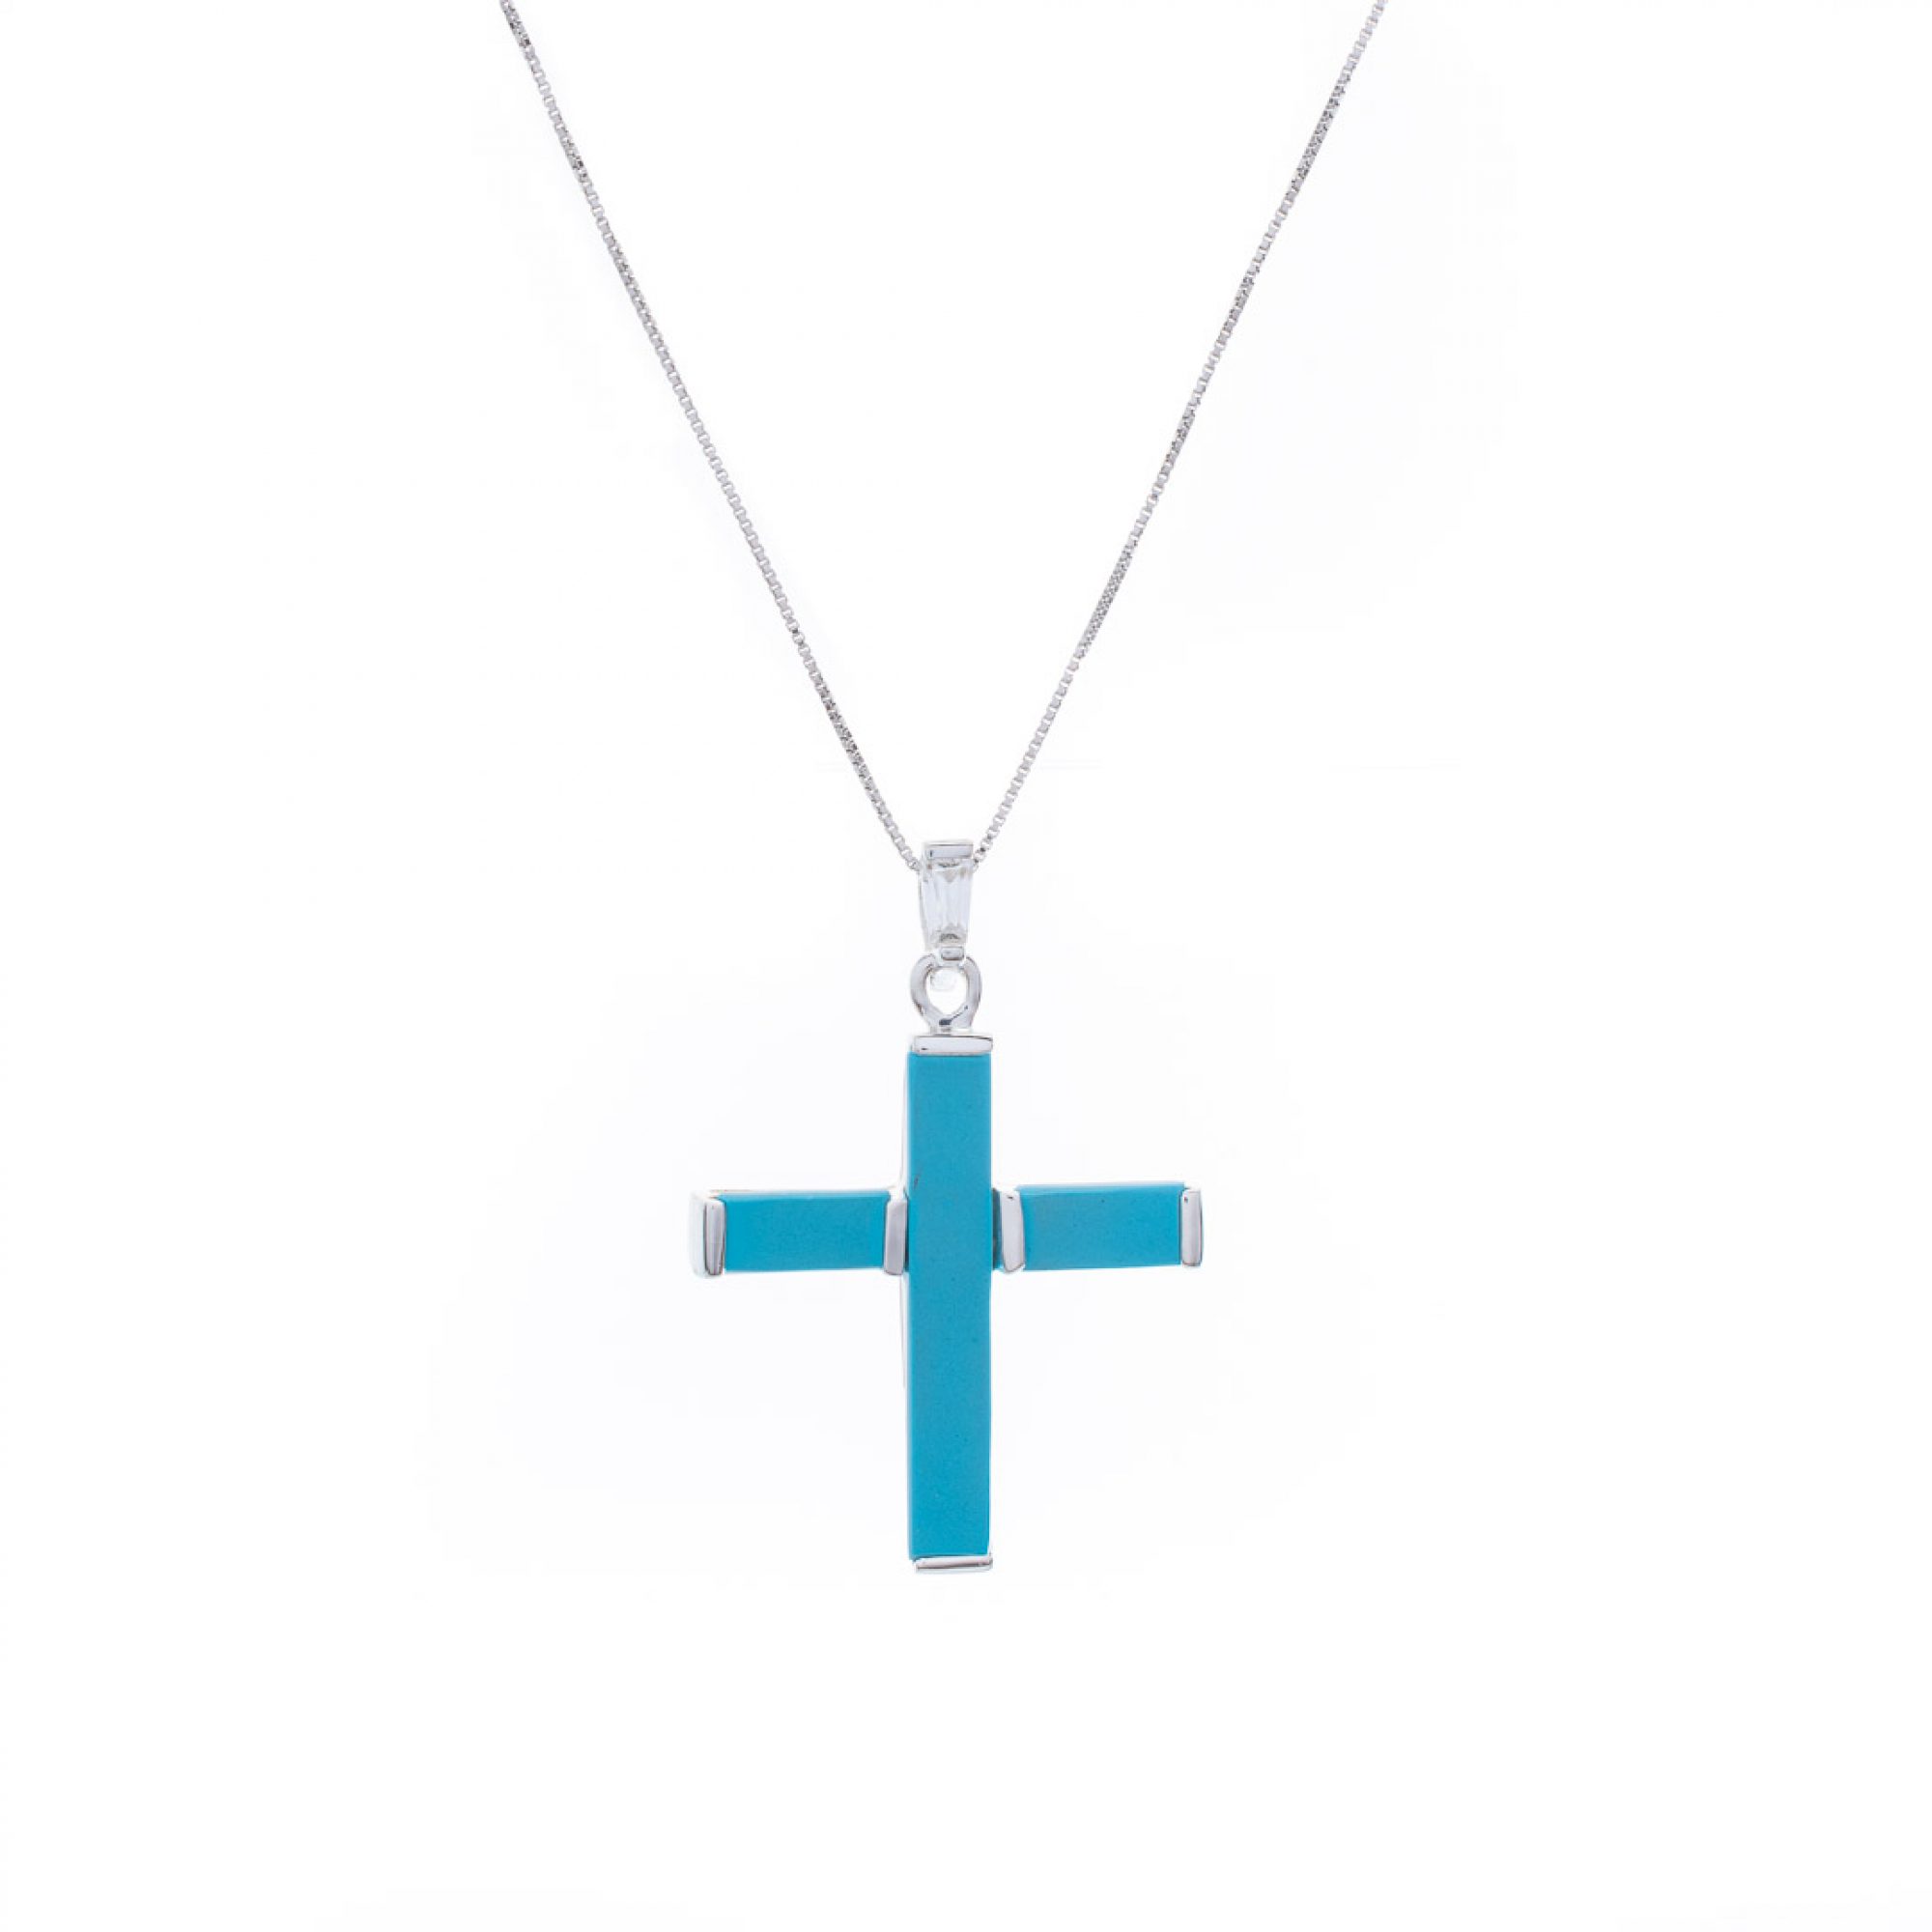 Cross pendant with natural turquoise stones